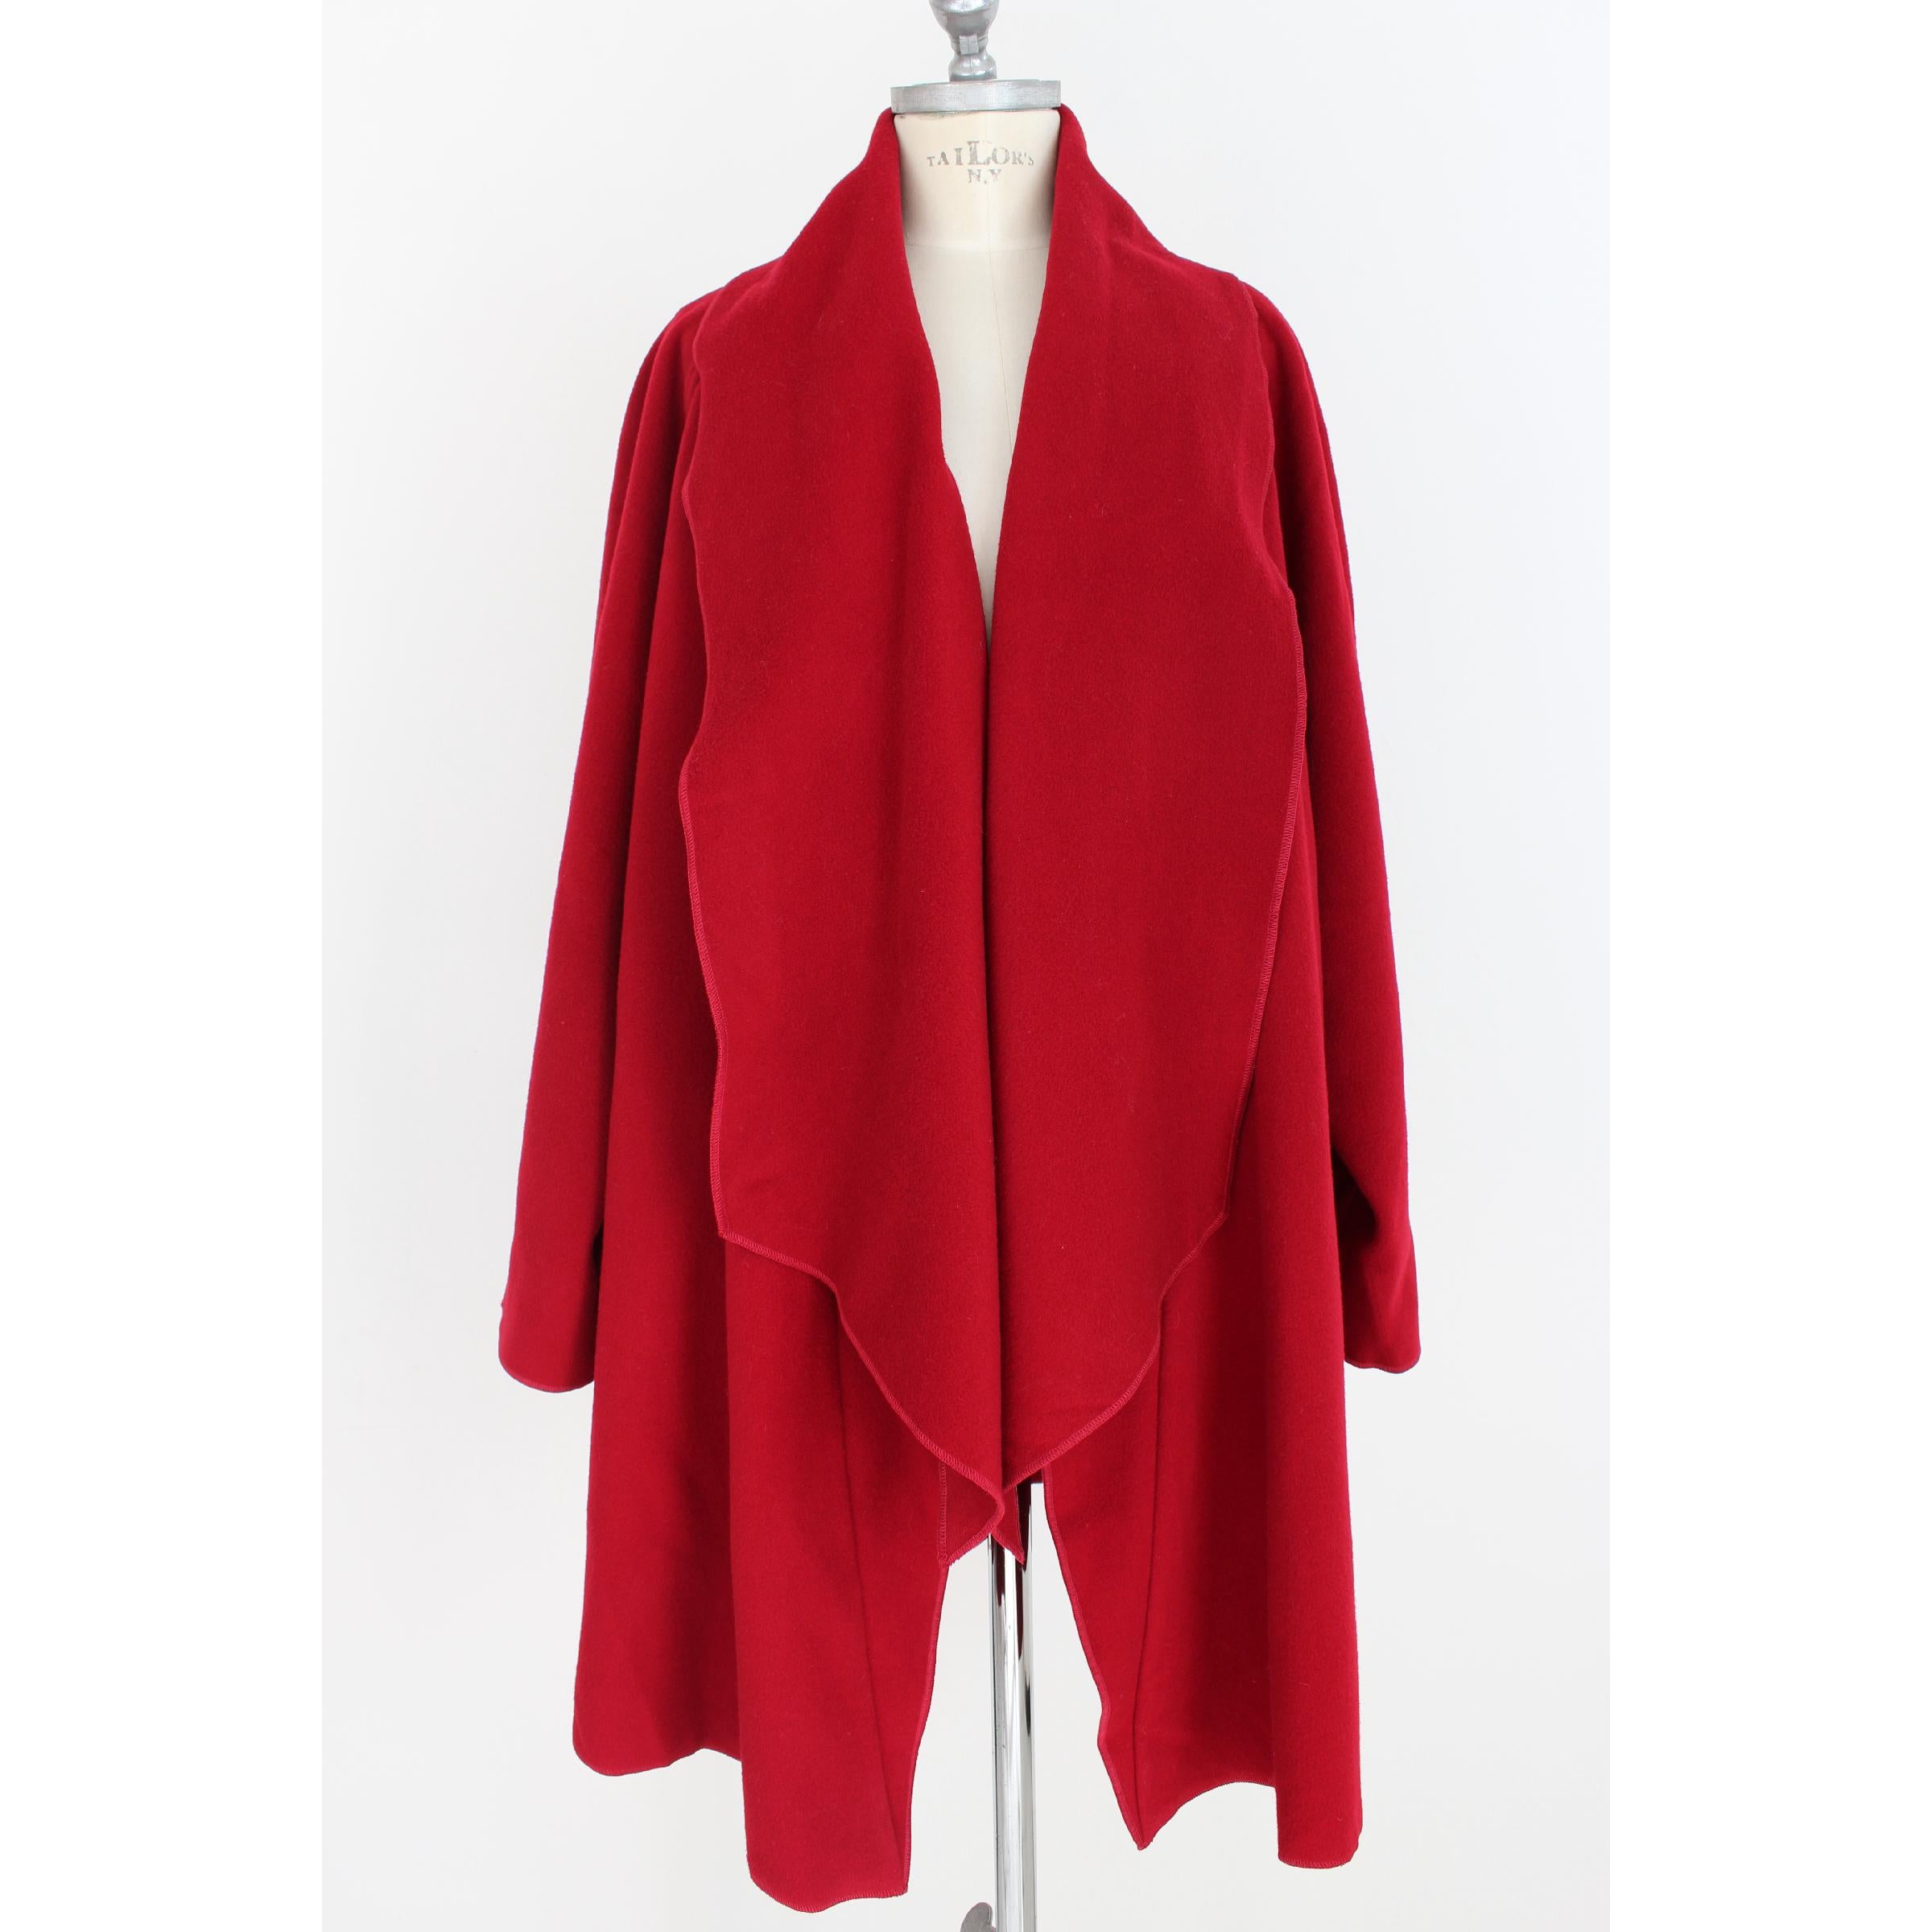 Fendi 365 vintage women's coat, 60% virgin wool 40% cashmere, red color, cloak model with shawl collar, two side pockets. 80s. Made in Italy. Excellent vintage conditions.

Size: 44 It 10 Us 12 Uk

Shoulder: 44 cm
Bust / Chest: 68 cm
Sleeve: 61